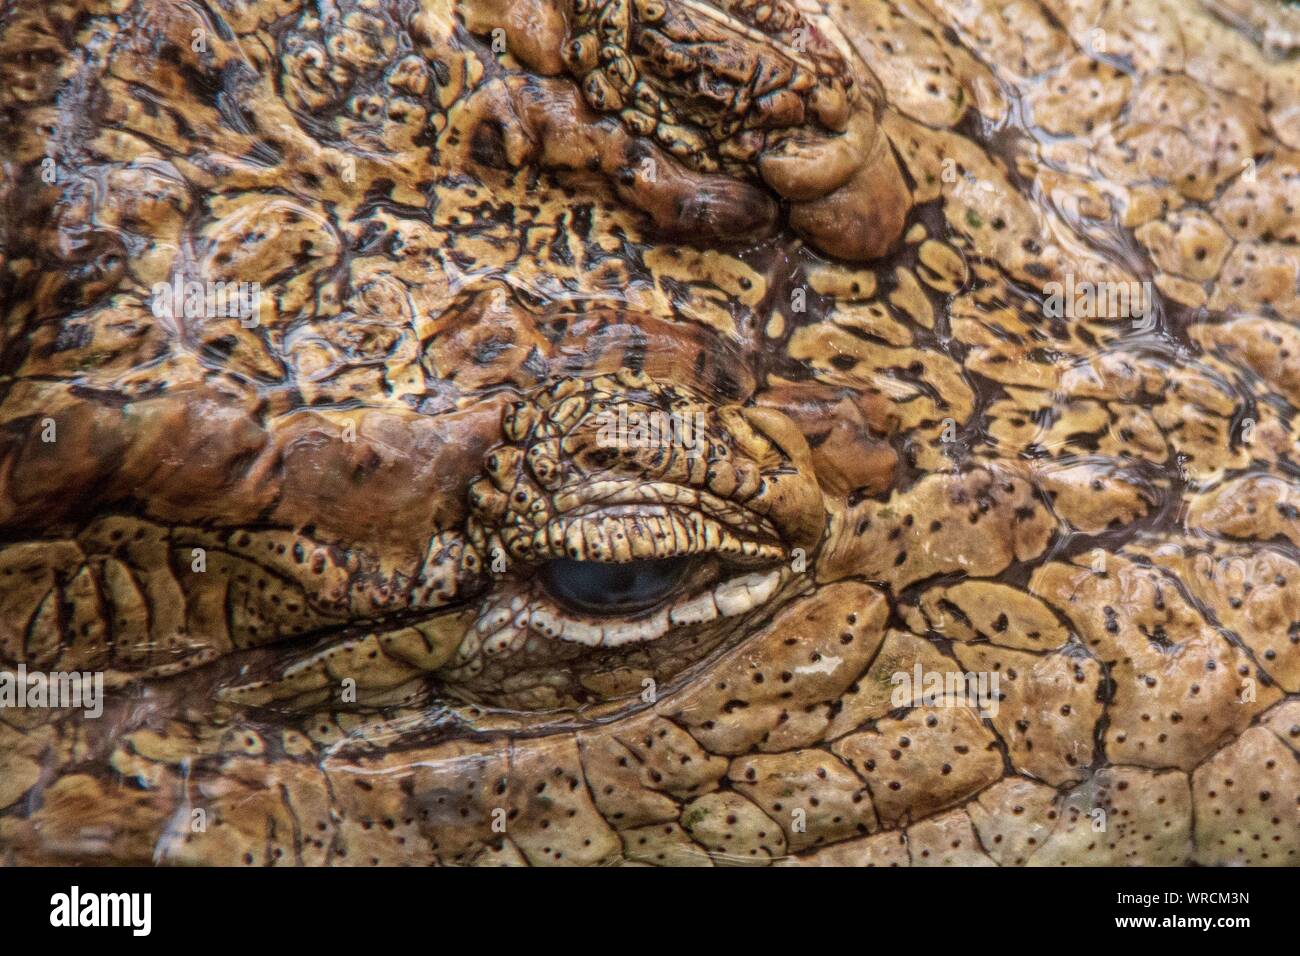 Close-up view of the eyes of a spectacled caiman (Caiman crocodilus) in the water Stock Photo